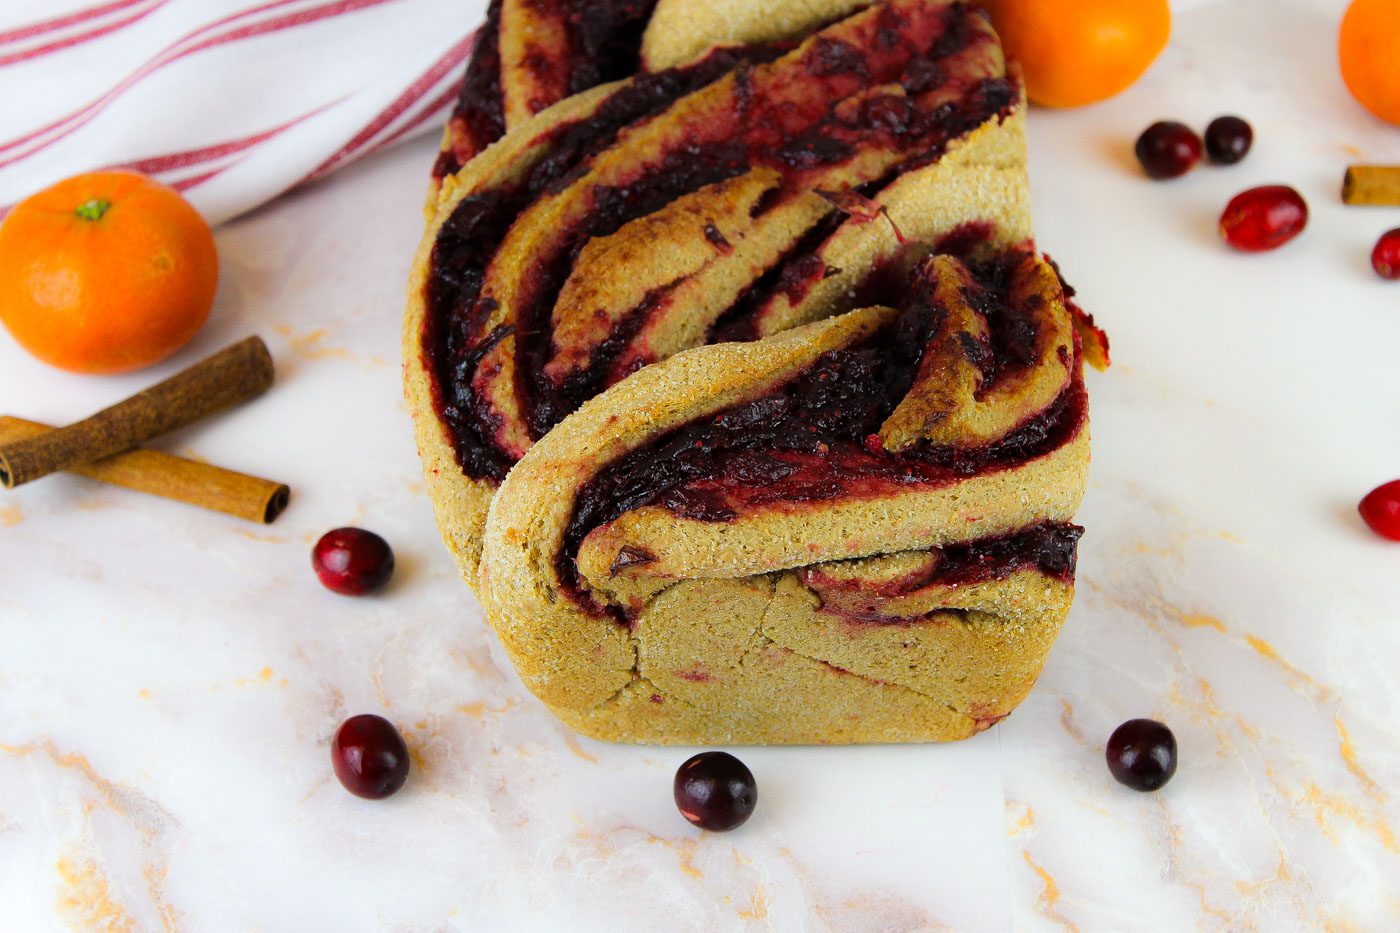 side view of cranberry bread with fresh cranberries, oranges and cinnamon sticks scattered about